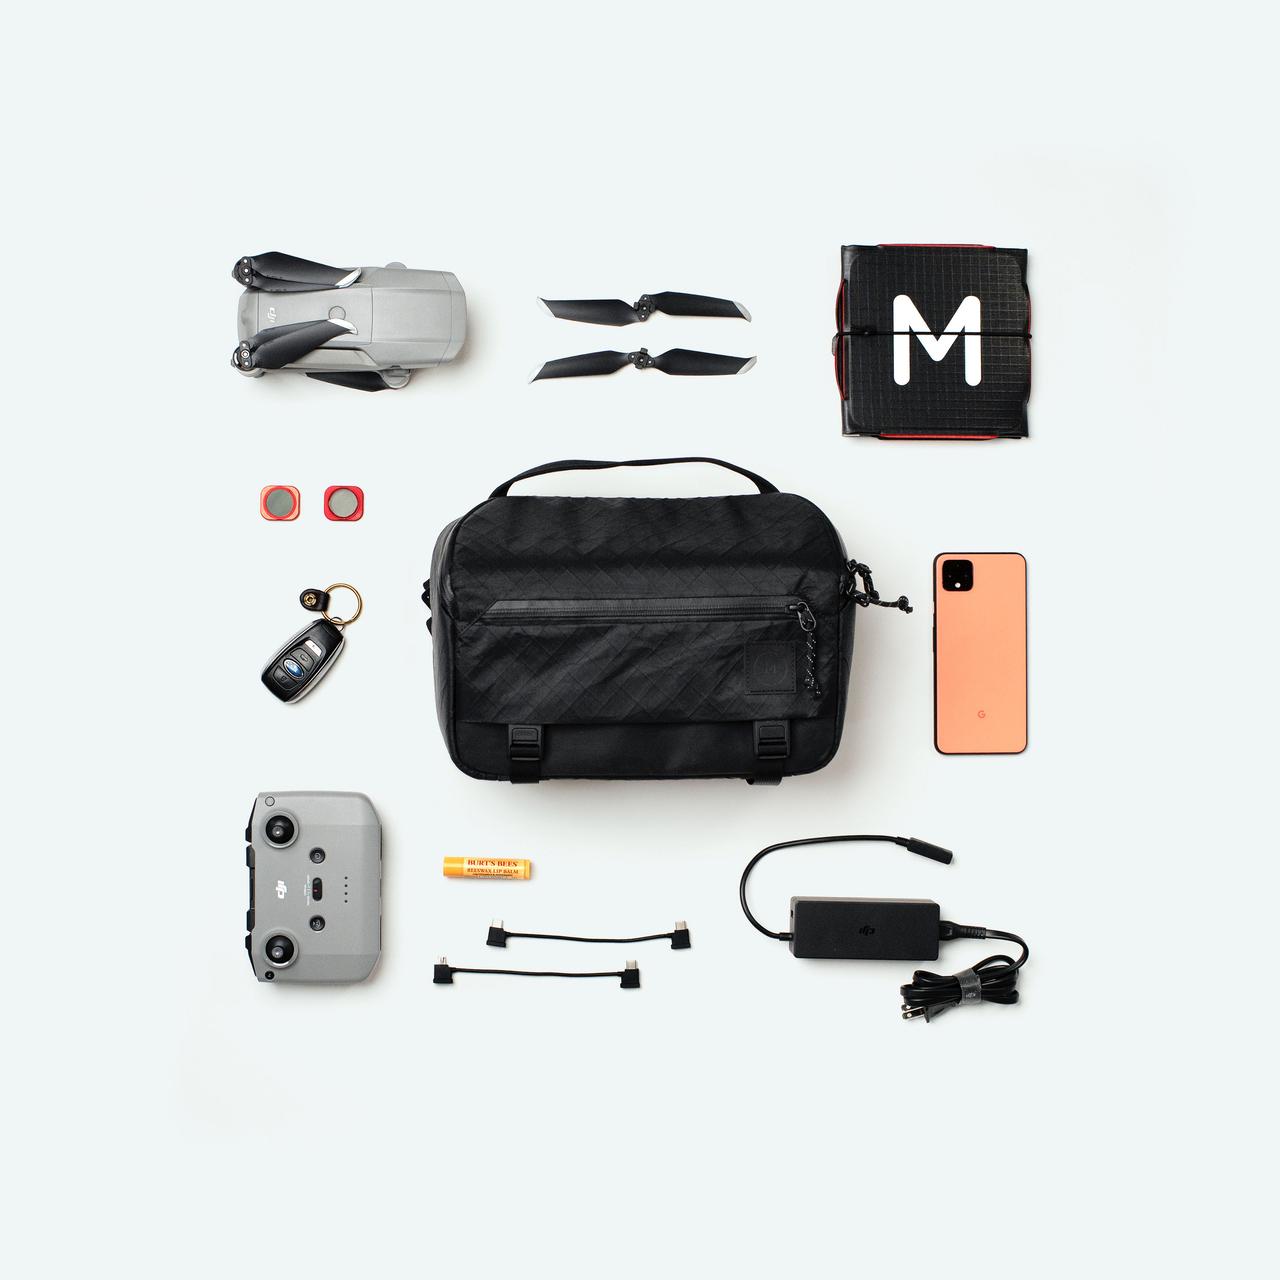 Moment 6 L sling flatlay drone 02